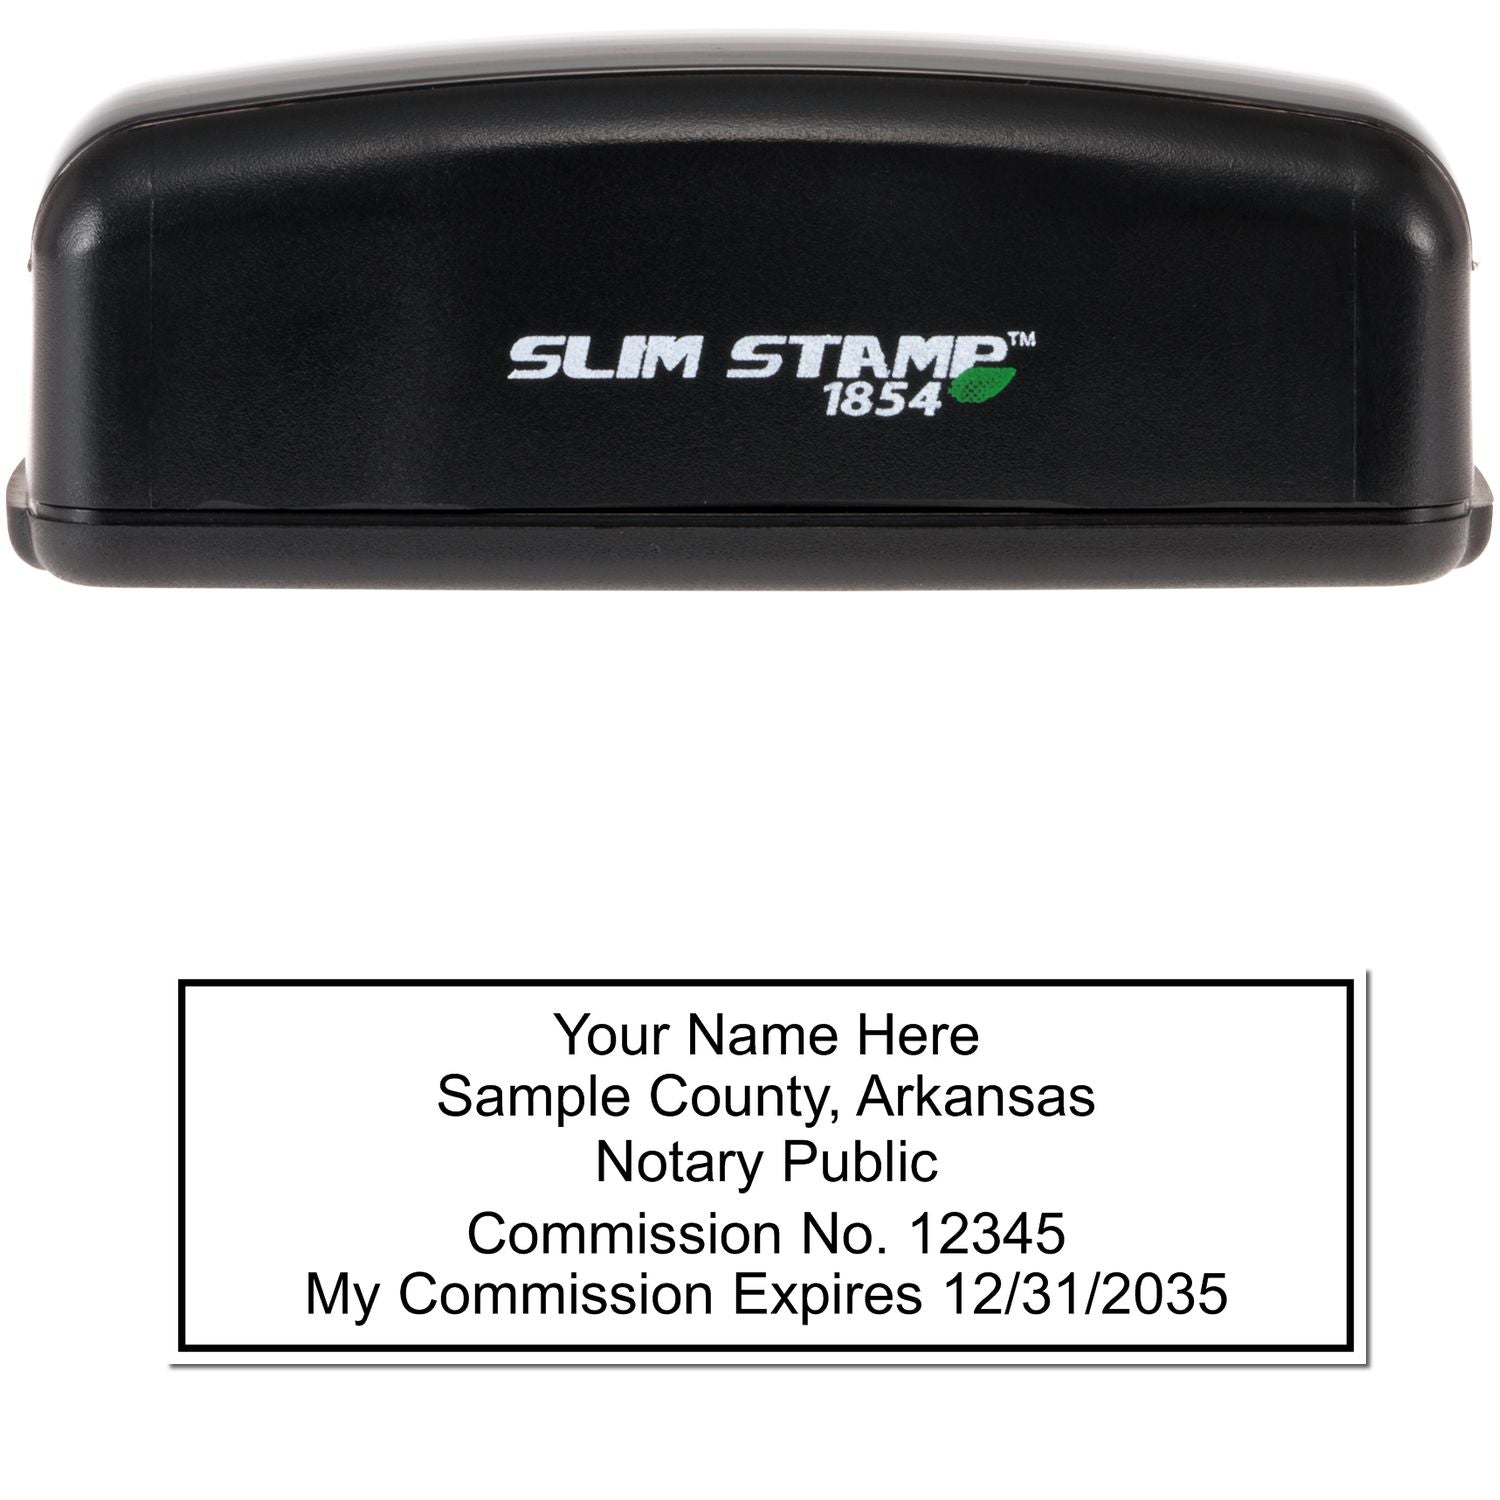 The main image for the Slim Pre-Inked Rectangular Notary Stamp for Arkansas depicting a sample of the imprint and electronic files